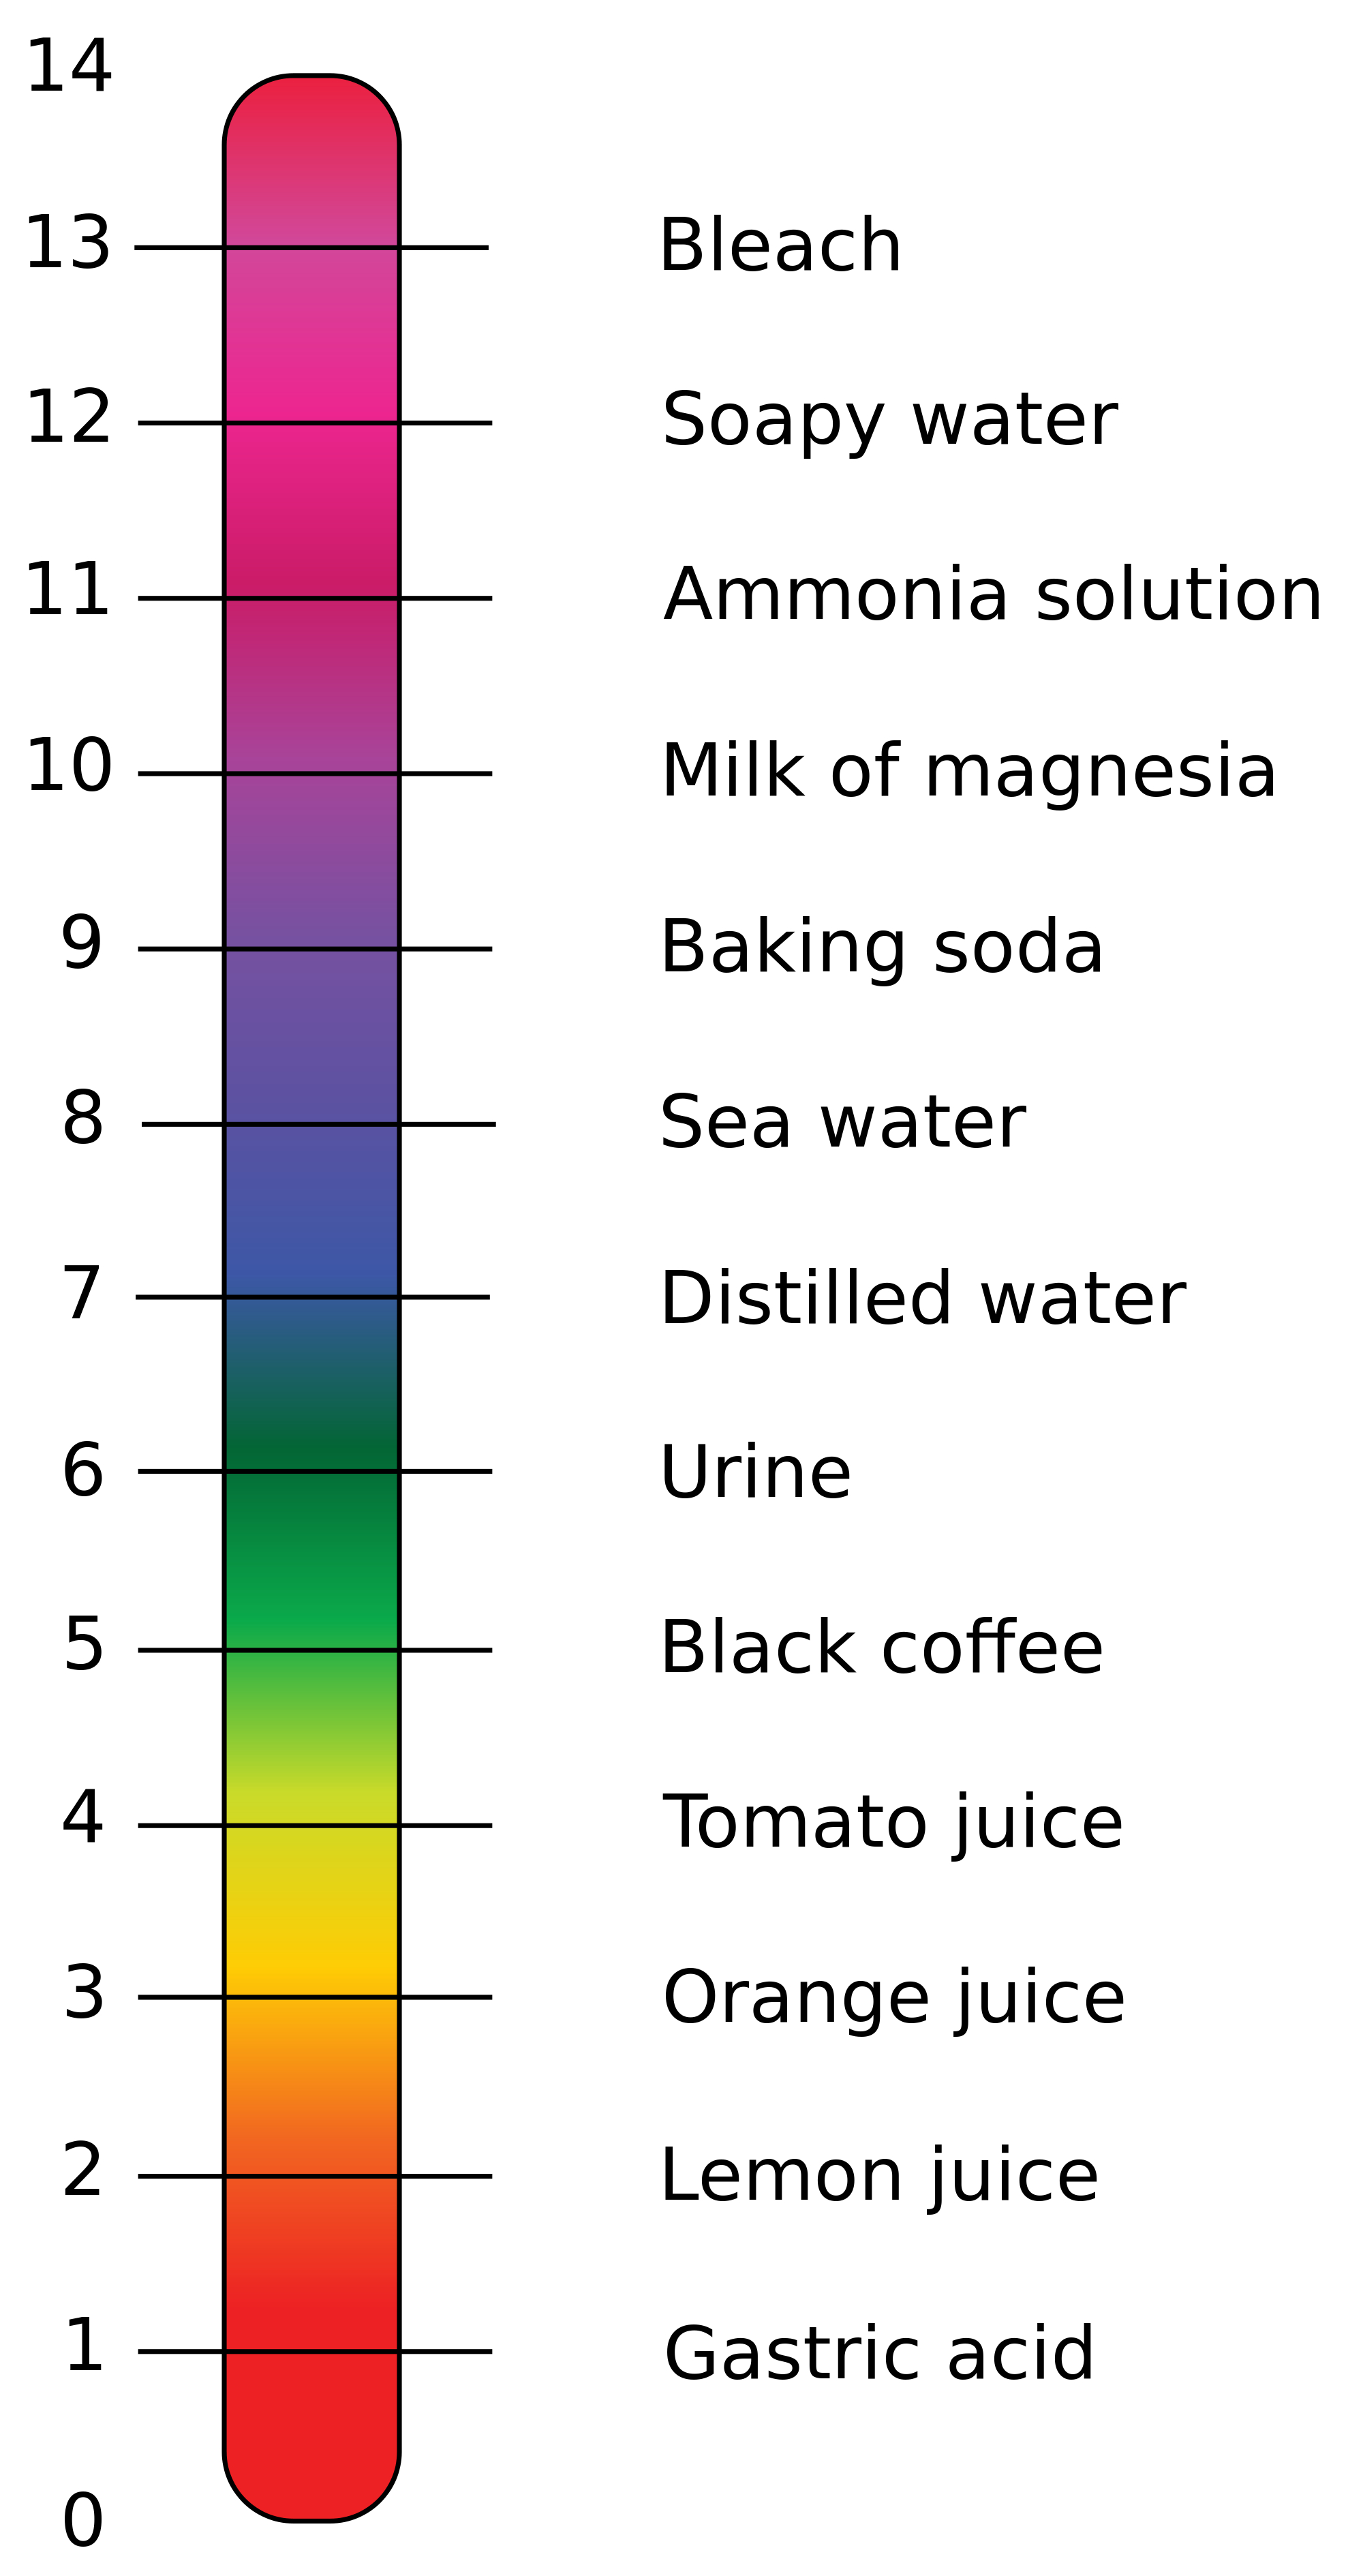 pH Values of Common Substances